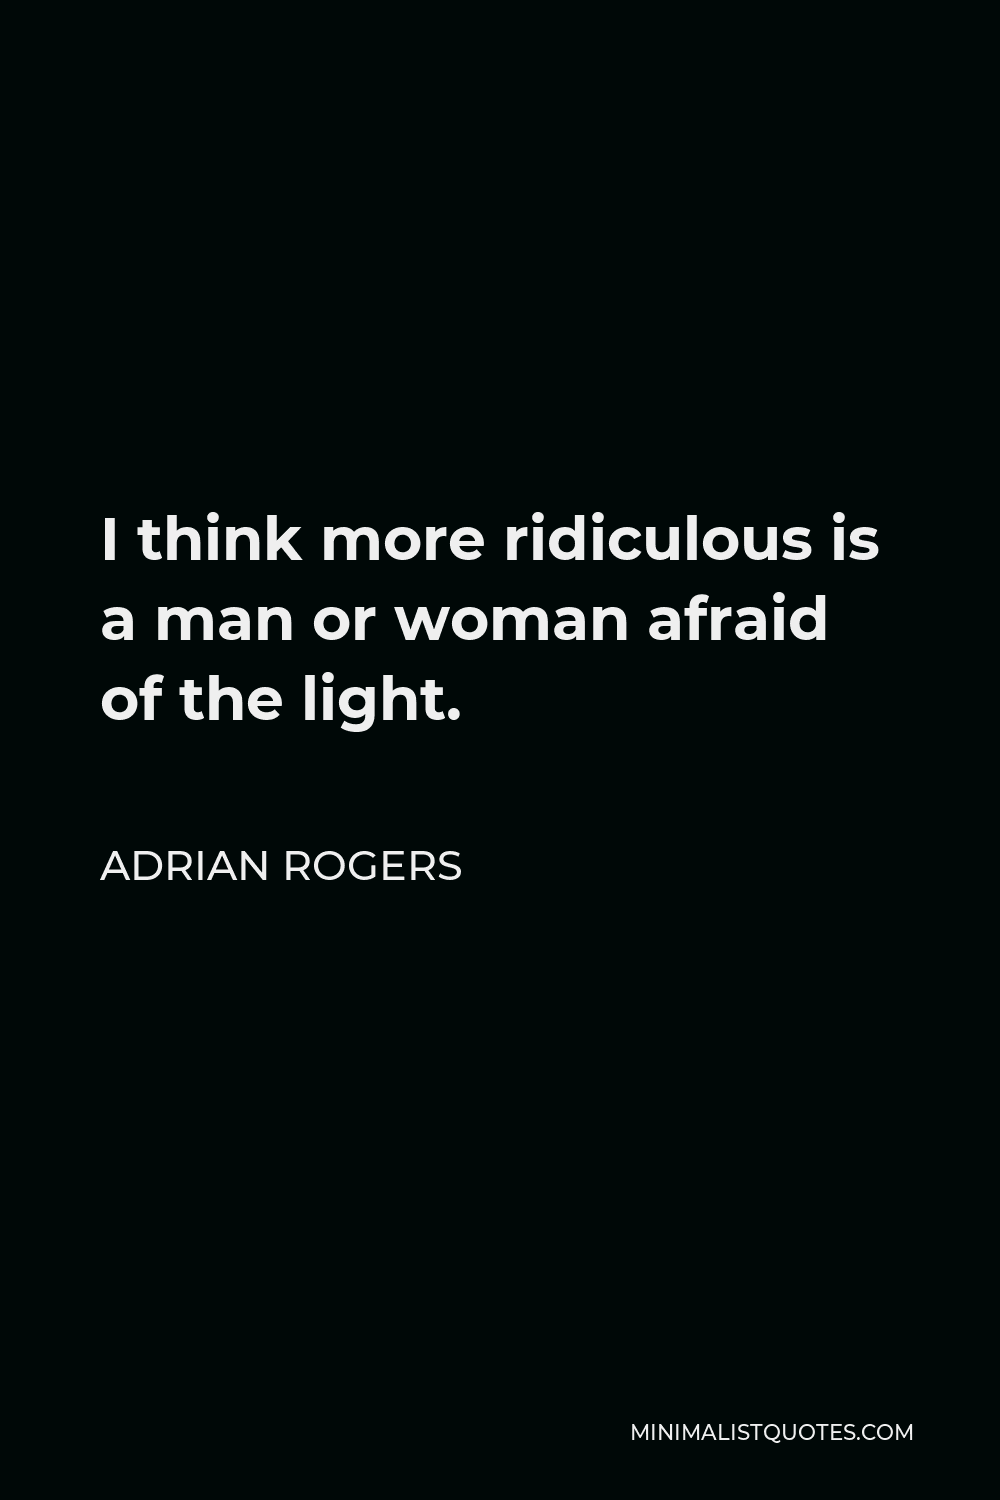 Adrian Rogers Quote - I think more ridiculous is a man or woman afraid of the light.